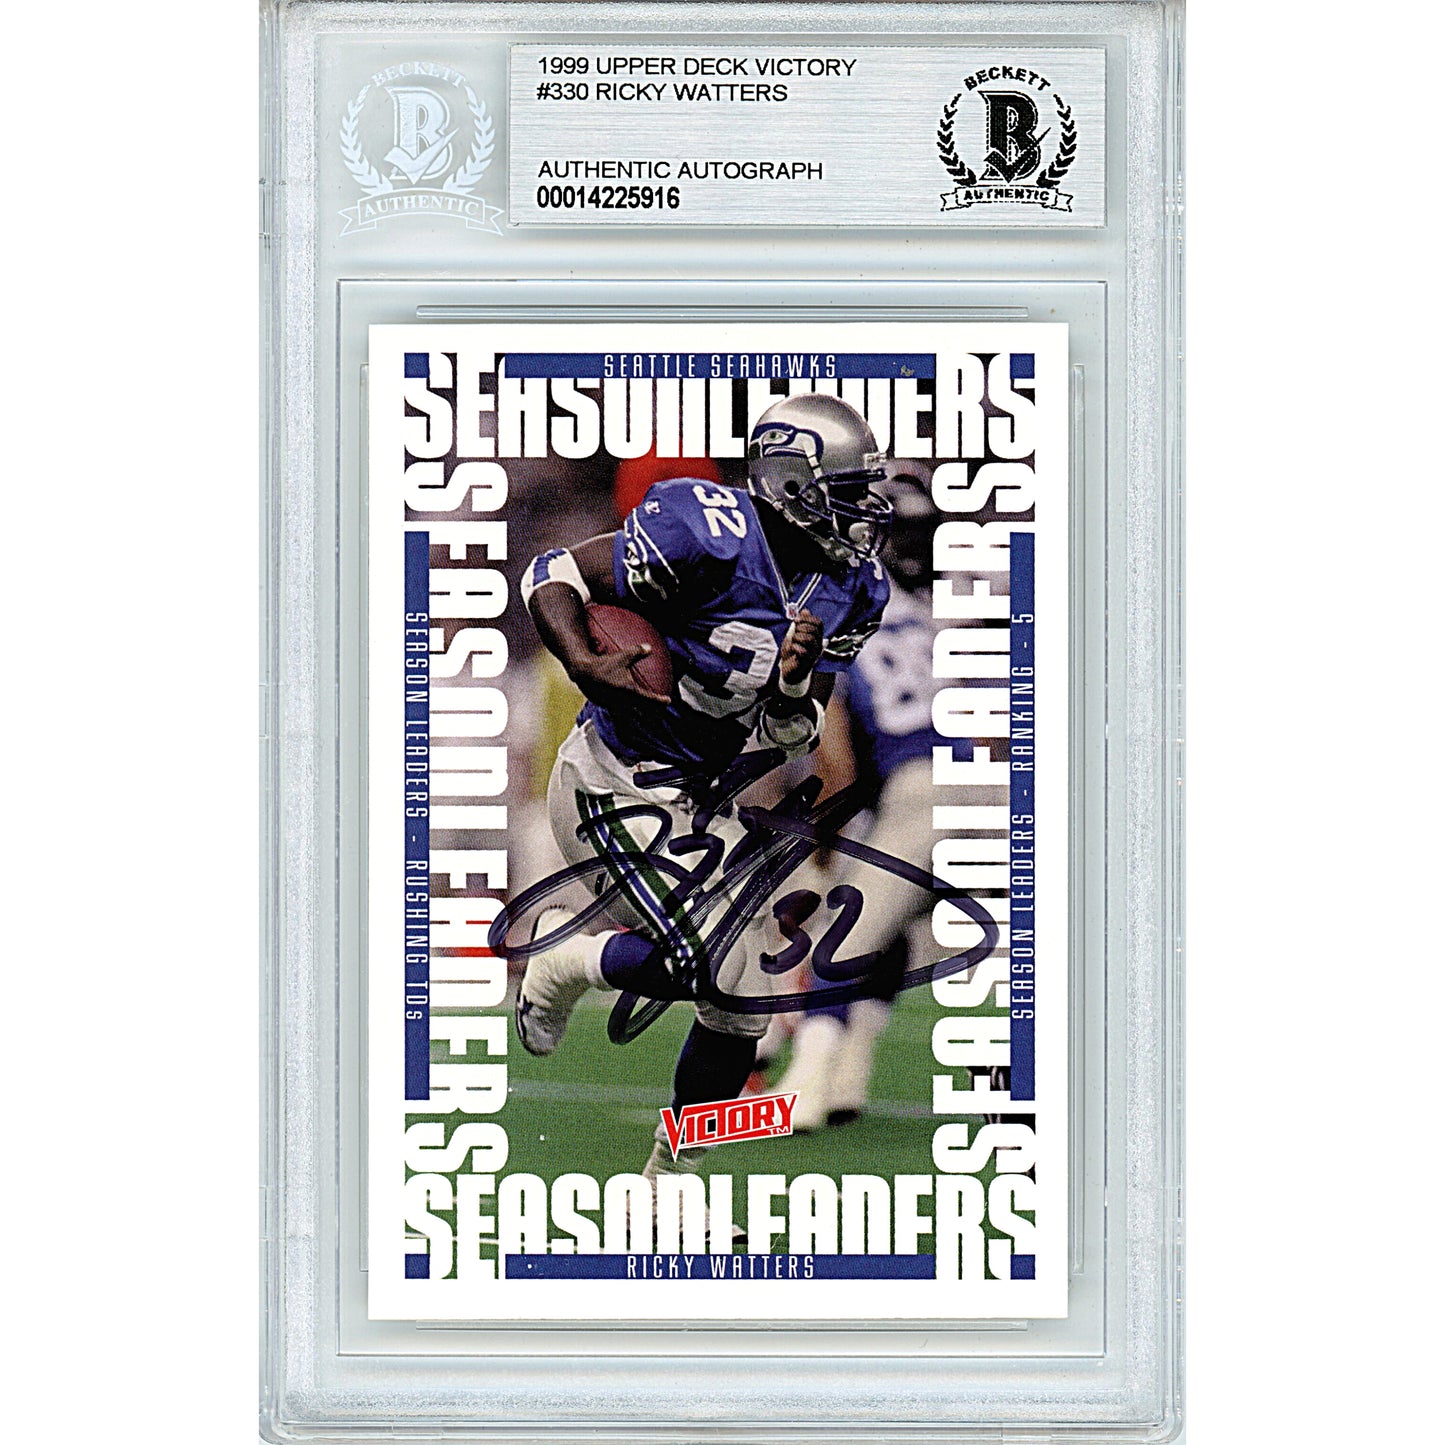 Footballs- Autographed- Ricky Watters Signed Seattle Seahawks 1999 Upper Deck Victory Football Card Beckett BAS Slabbed 00014225916 - 101